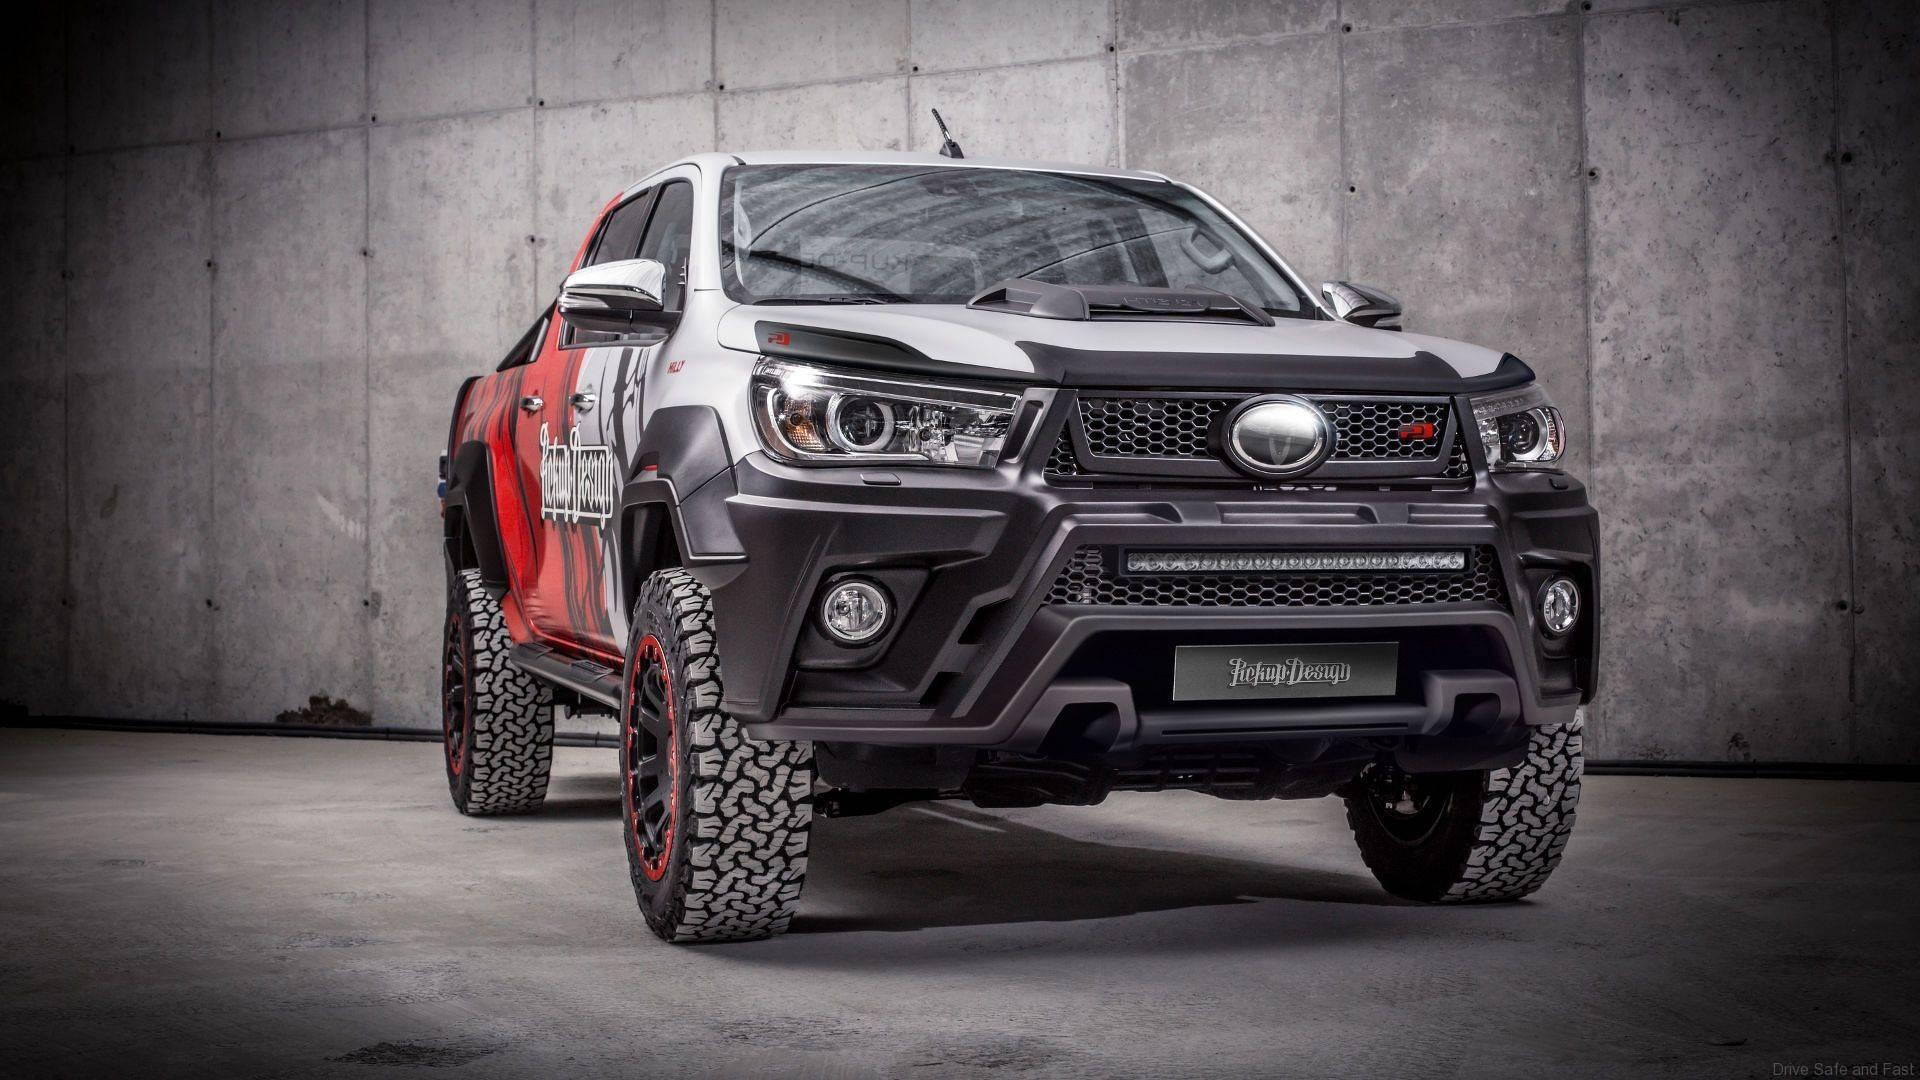 ‘Carlex’ offers a tuning idea for your Toyota Hilux